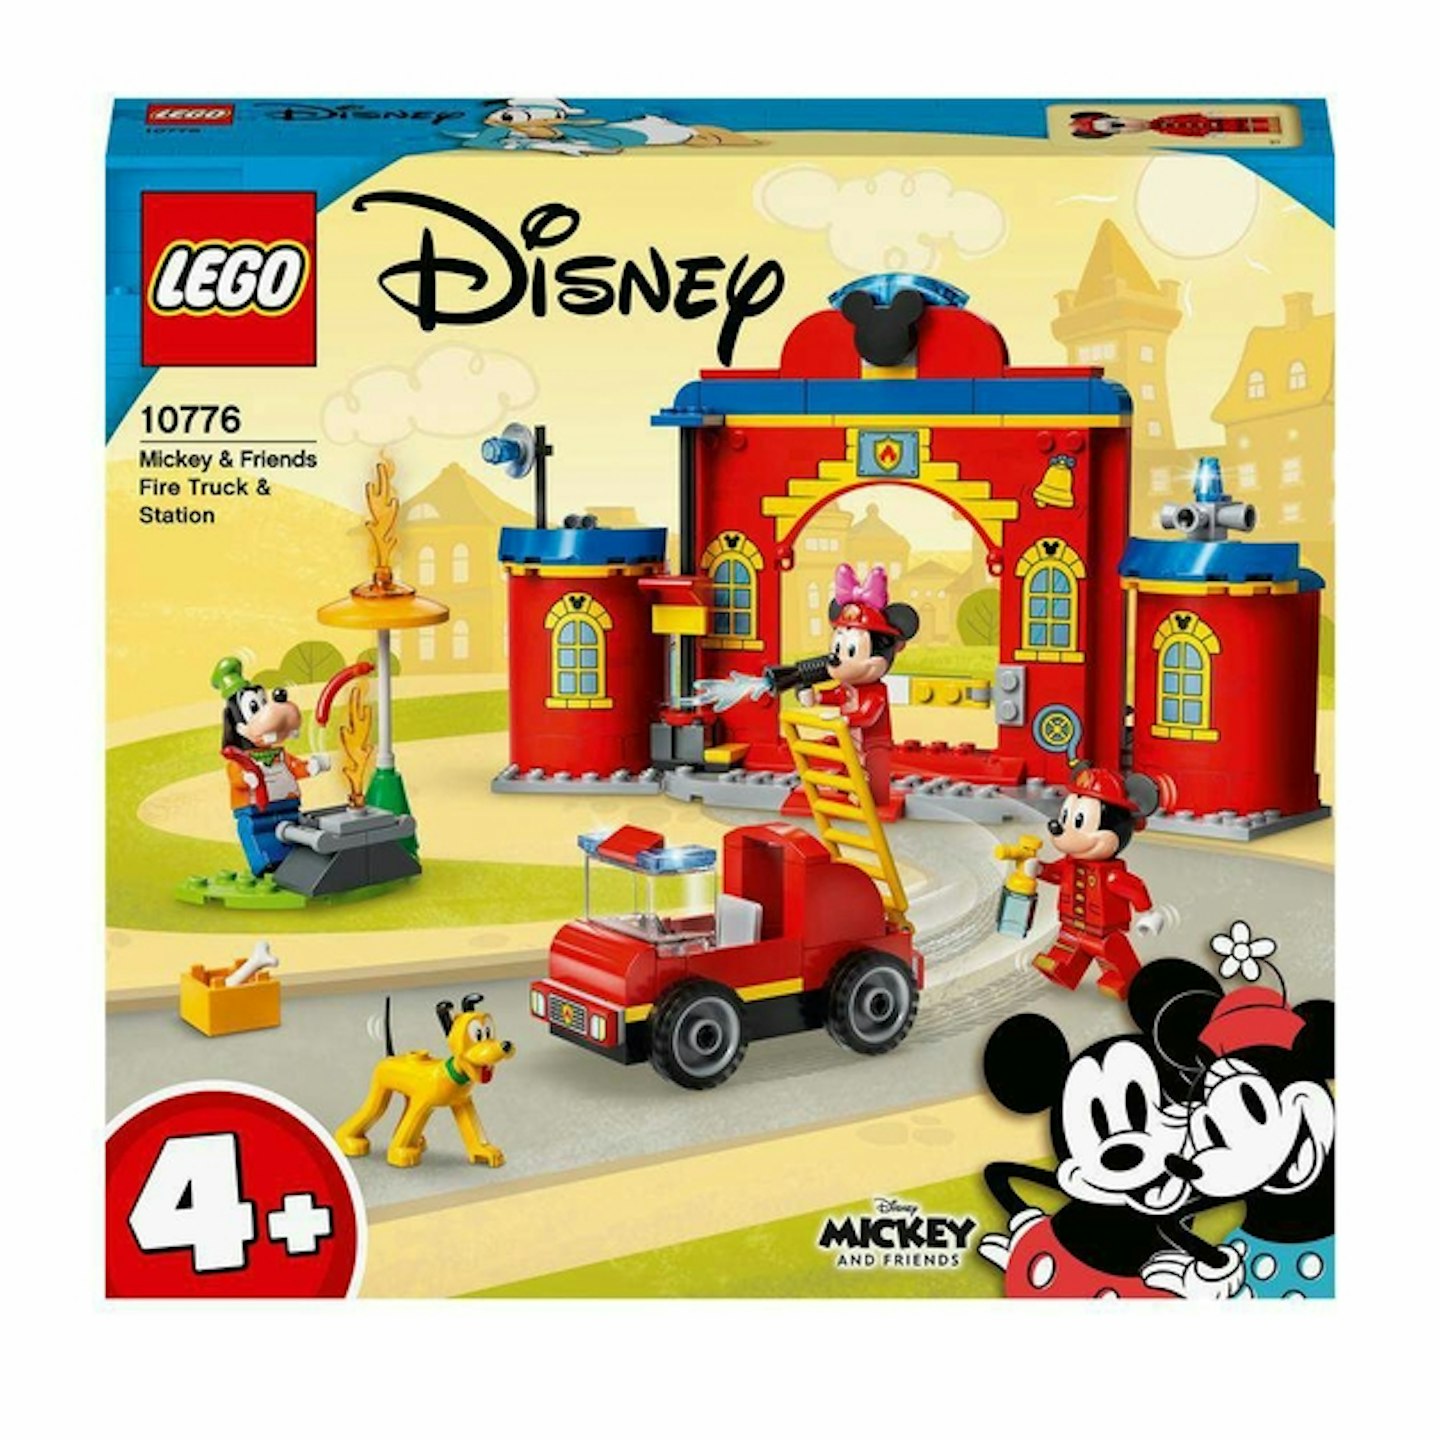 Lego - Best Mickey Mouse products